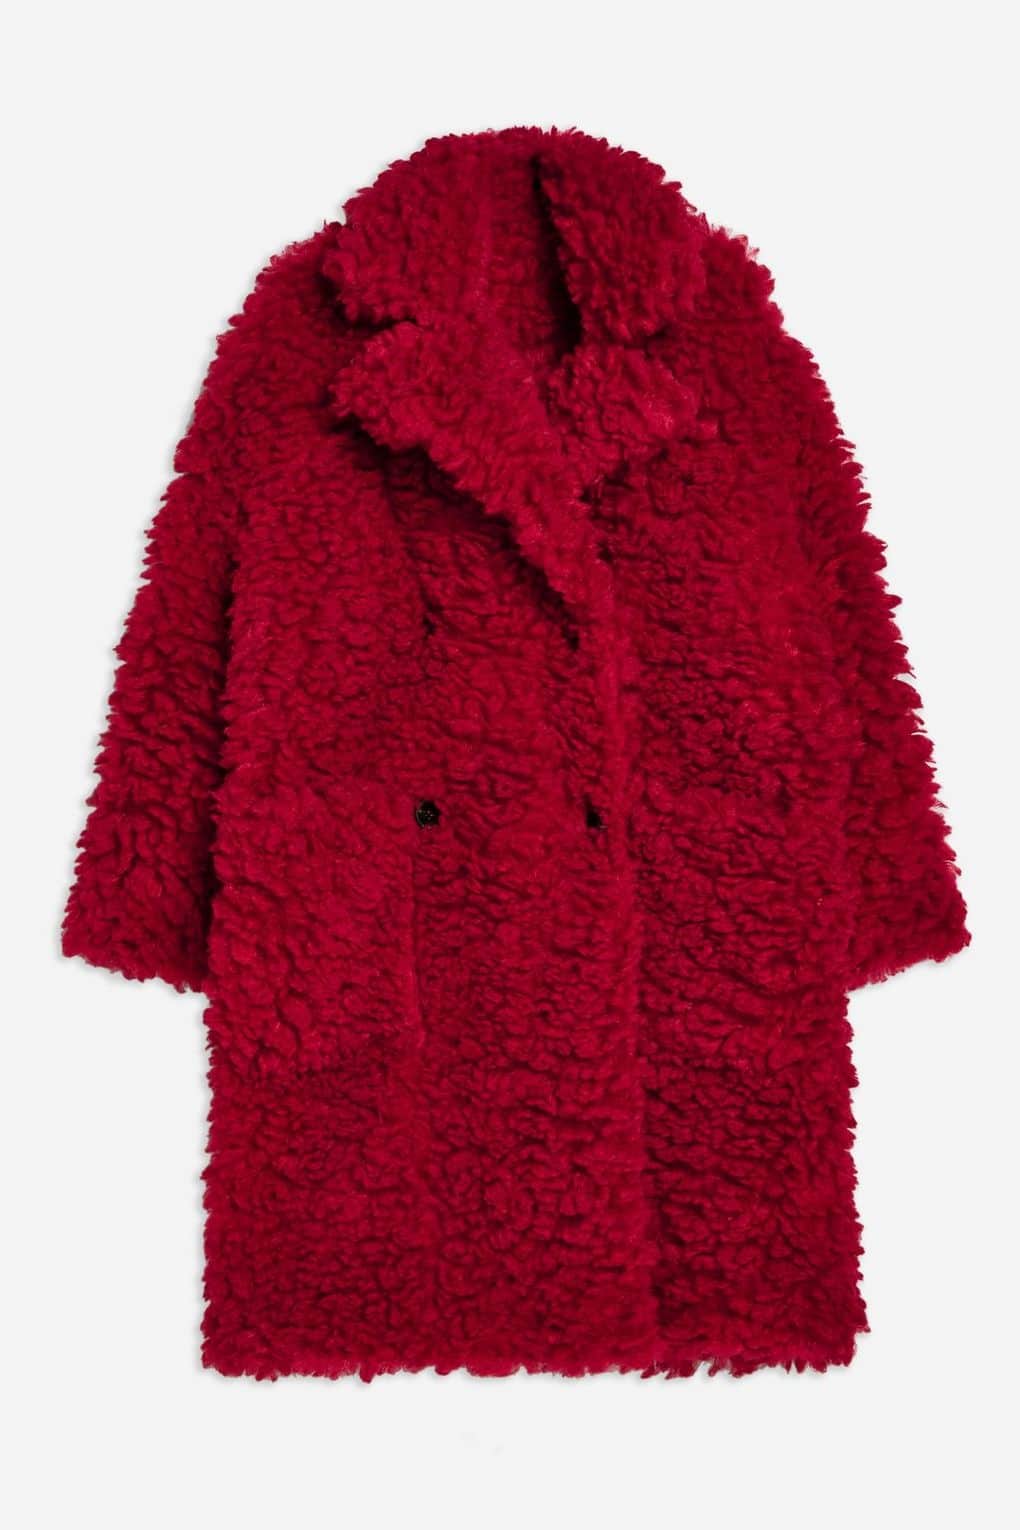 Bundle Up, Sis! It’s Still Cold Outside But Here Are 10 Warm Coats For Under $200